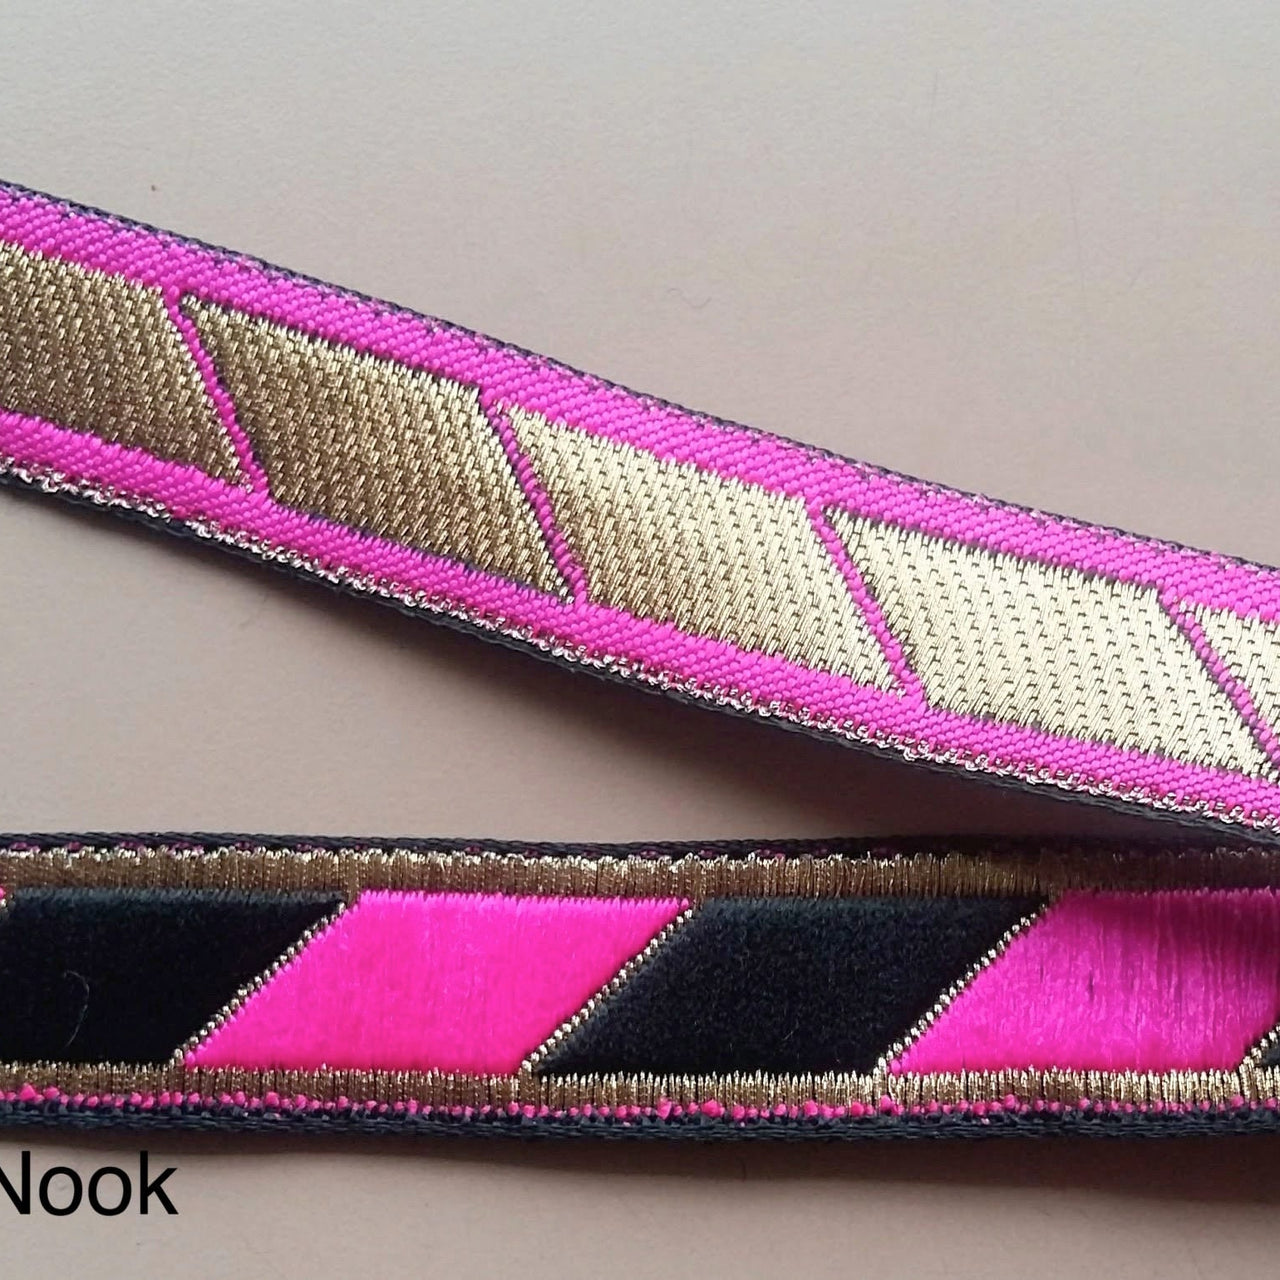 Black, Fuchsia Pink And Bronze Thread Embroidered Lace Trim, 20mm wide - 200317L337